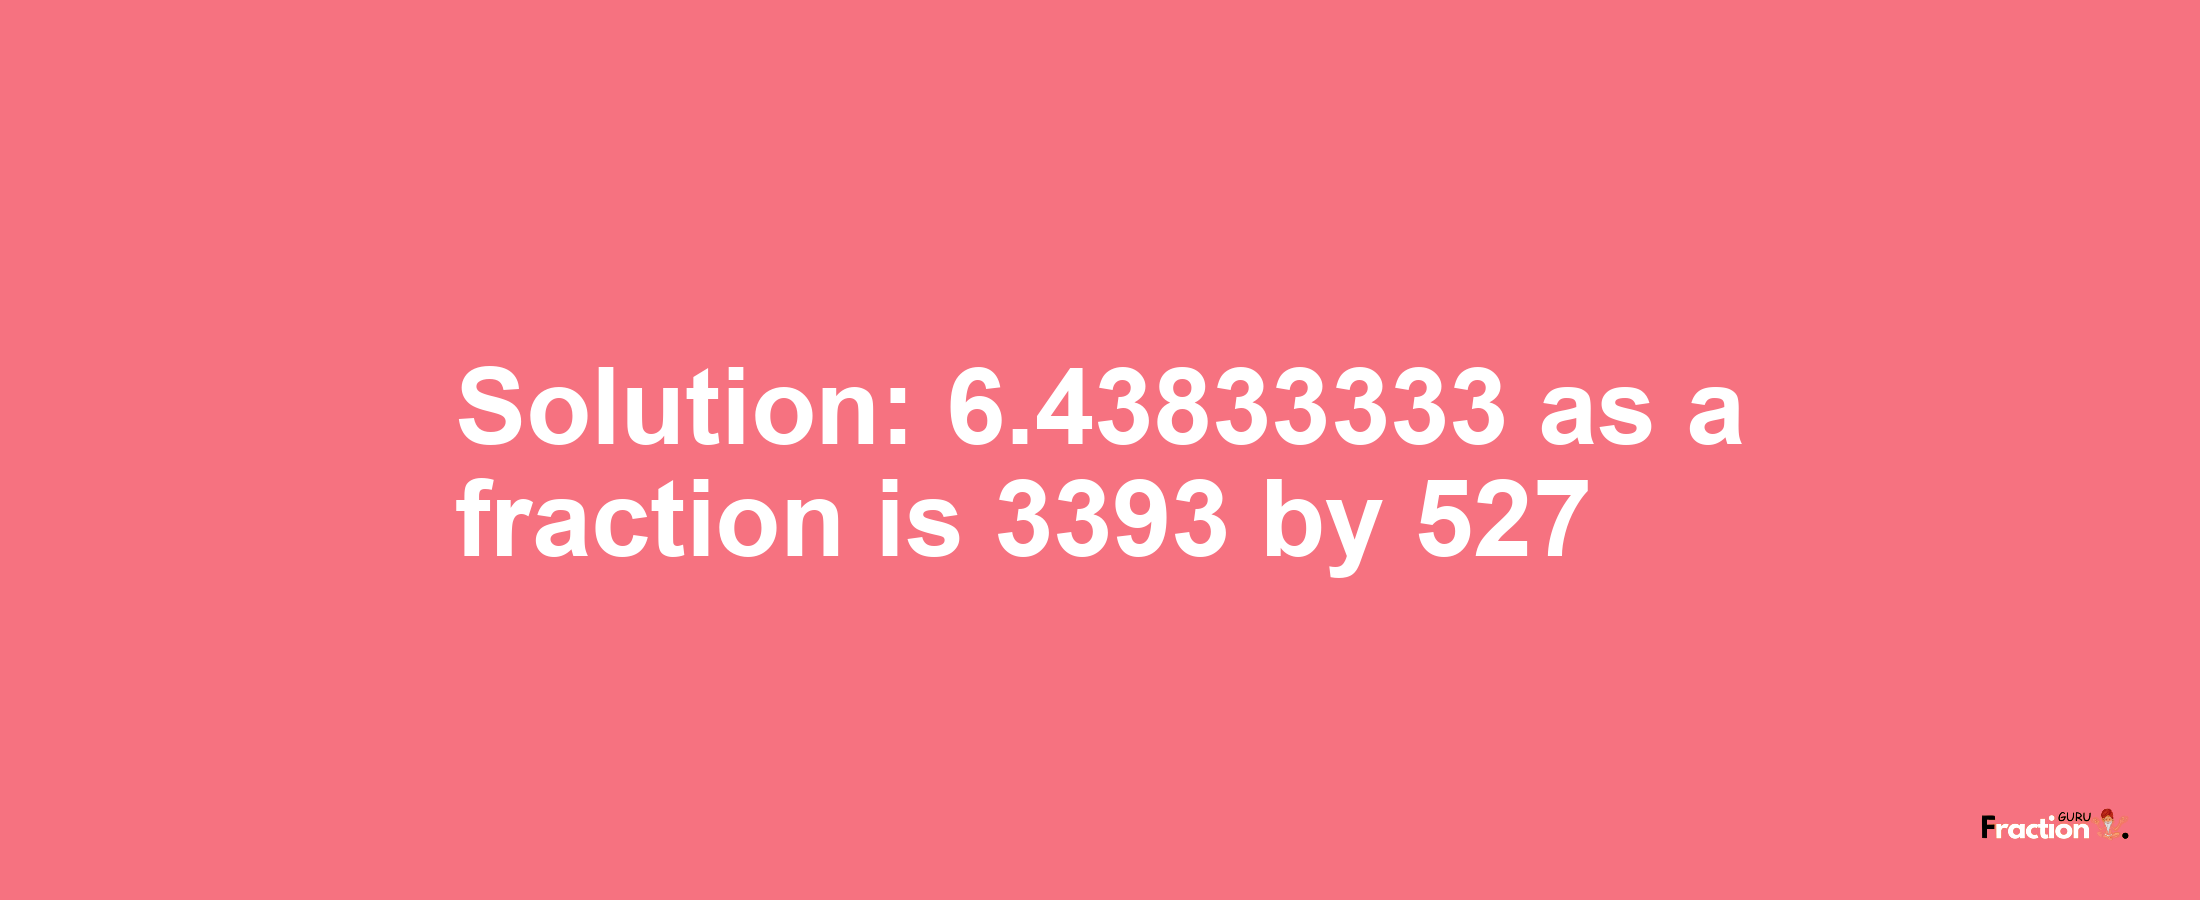 Solution:6.43833333 as a fraction is 3393/527